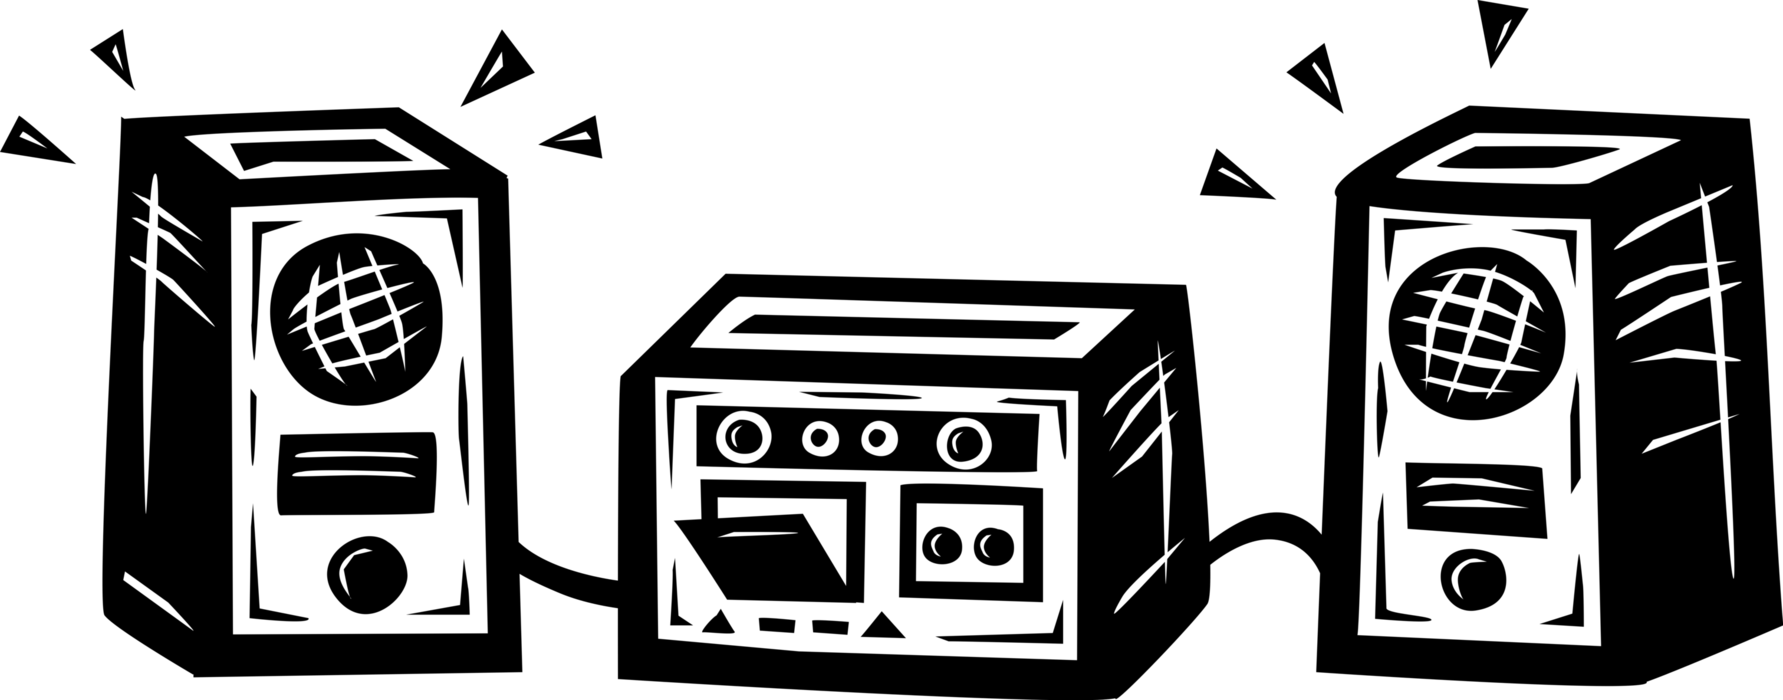 Vector Illustration of Home Stereo Entertainment System with Loudspeaker Speakers